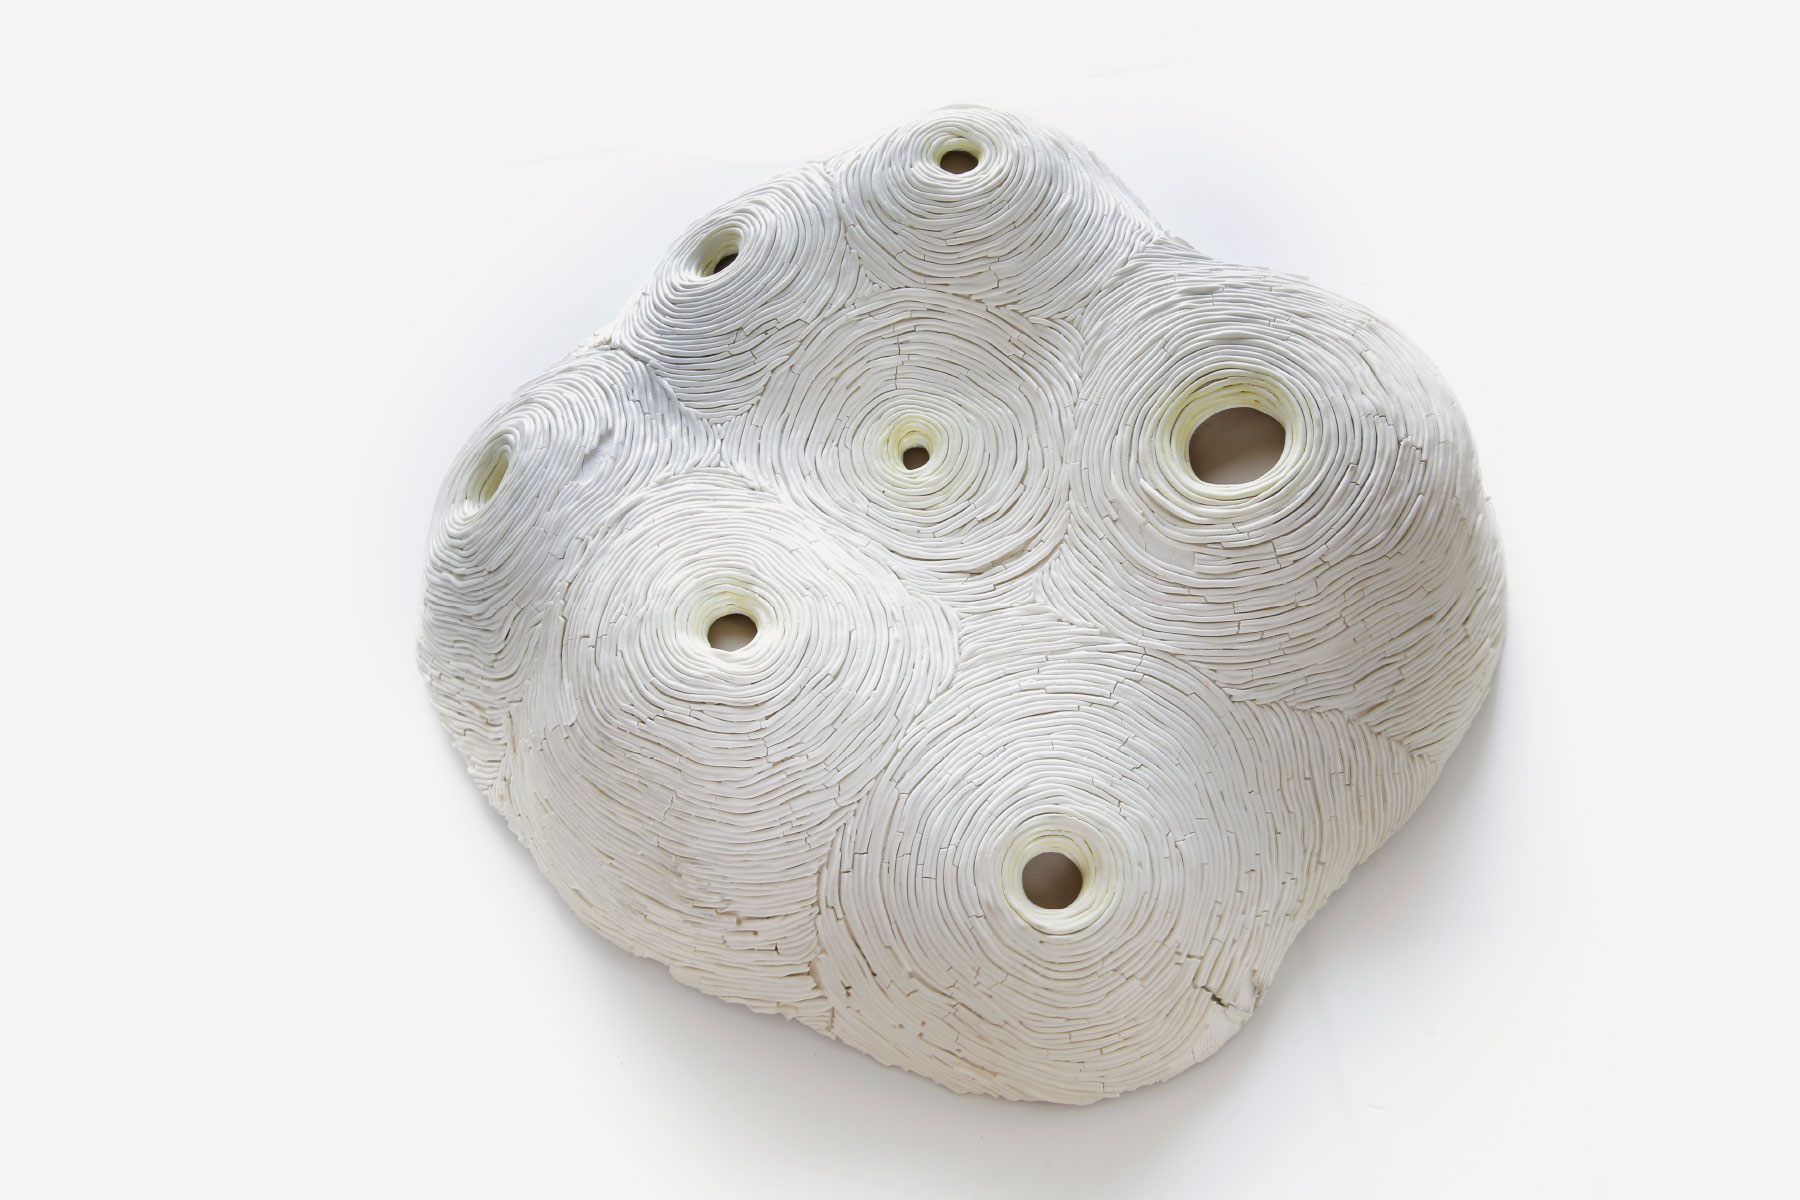 Angelica Tulimiero Sculpture Spring has Brought Pollen porcelain stain glaze leather Italiano Plurale